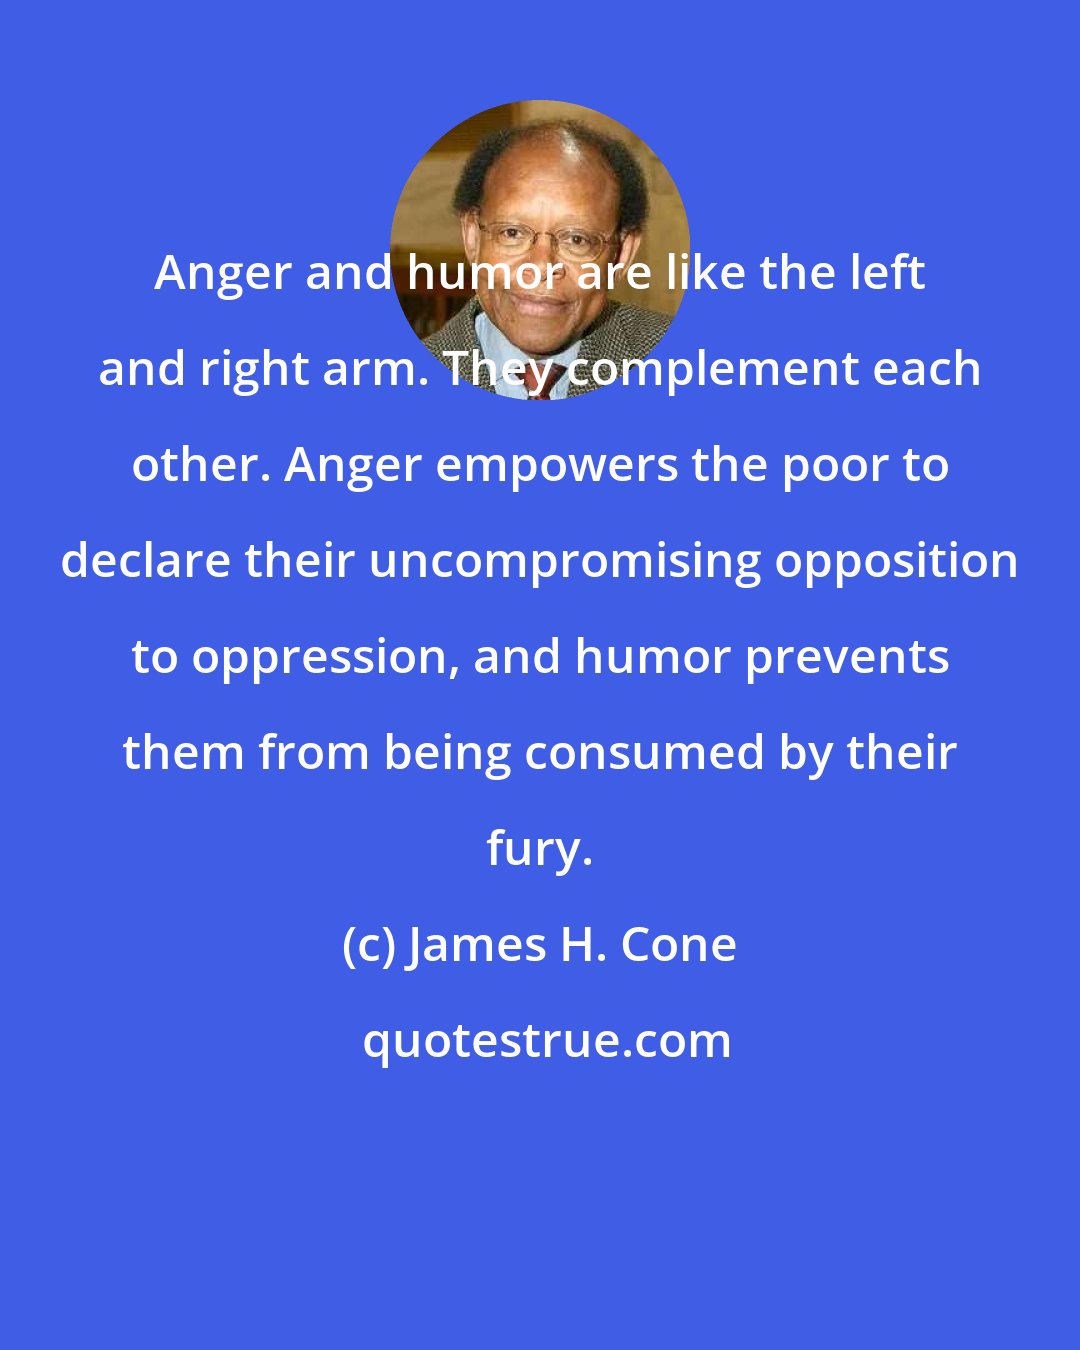 James H. Cone: Anger and humor are like the left and right arm. They complement each other. Anger empowers the poor to declare their uncompromising opposition to oppression, and humor prevents them from being consumed by their fury.